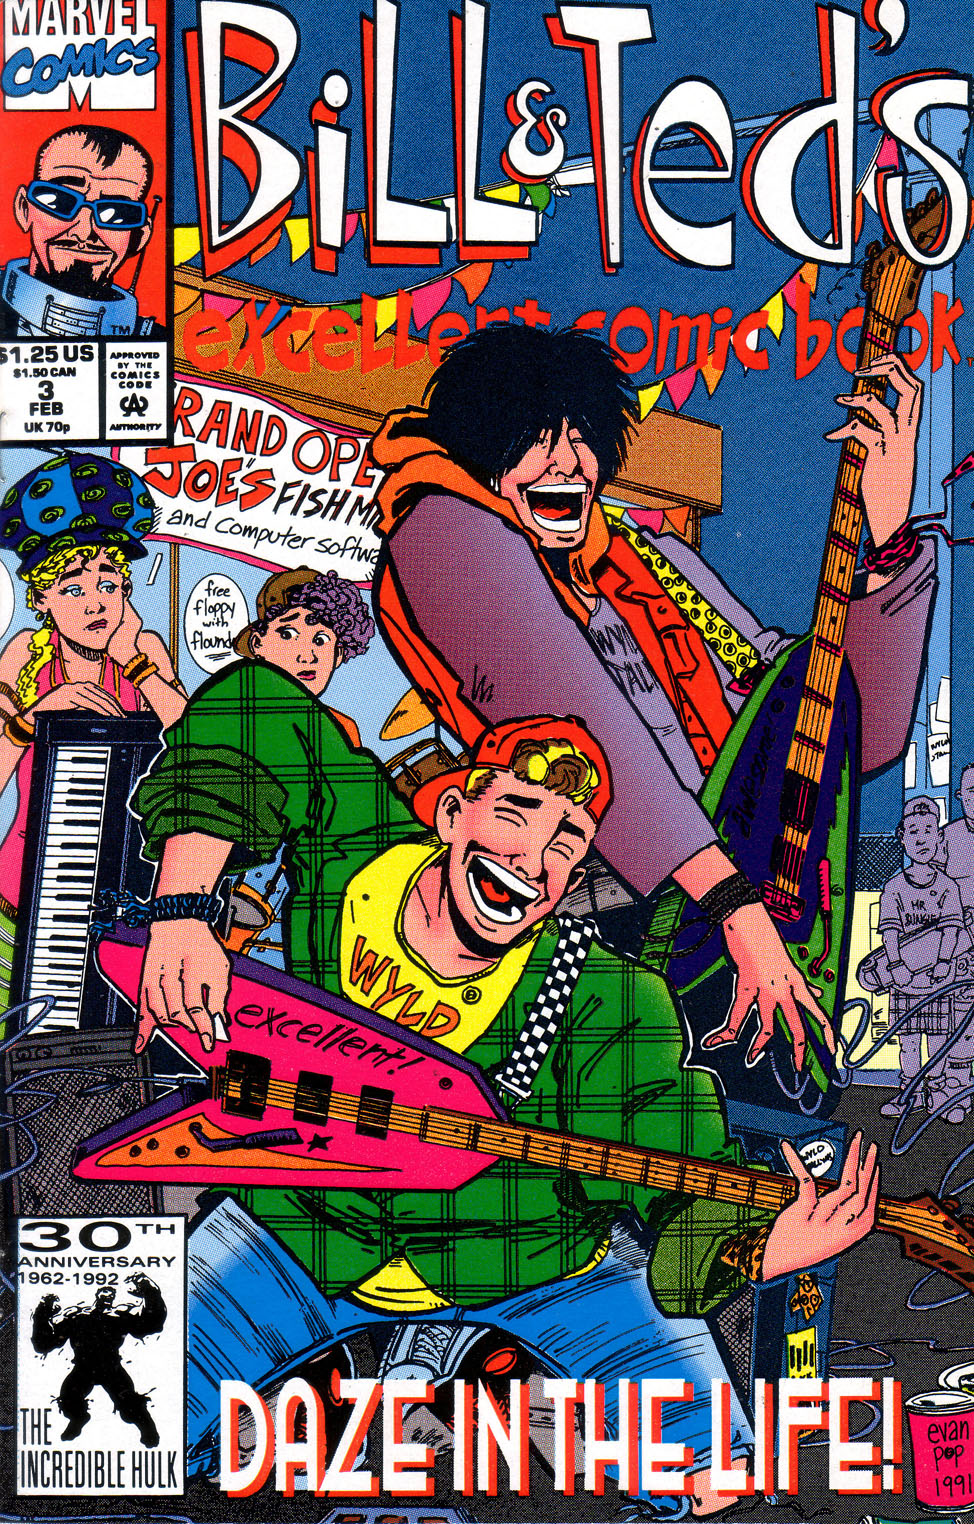 Read online Bill & Ted's Excellent Comic Book comic -  Issue #3 - 1